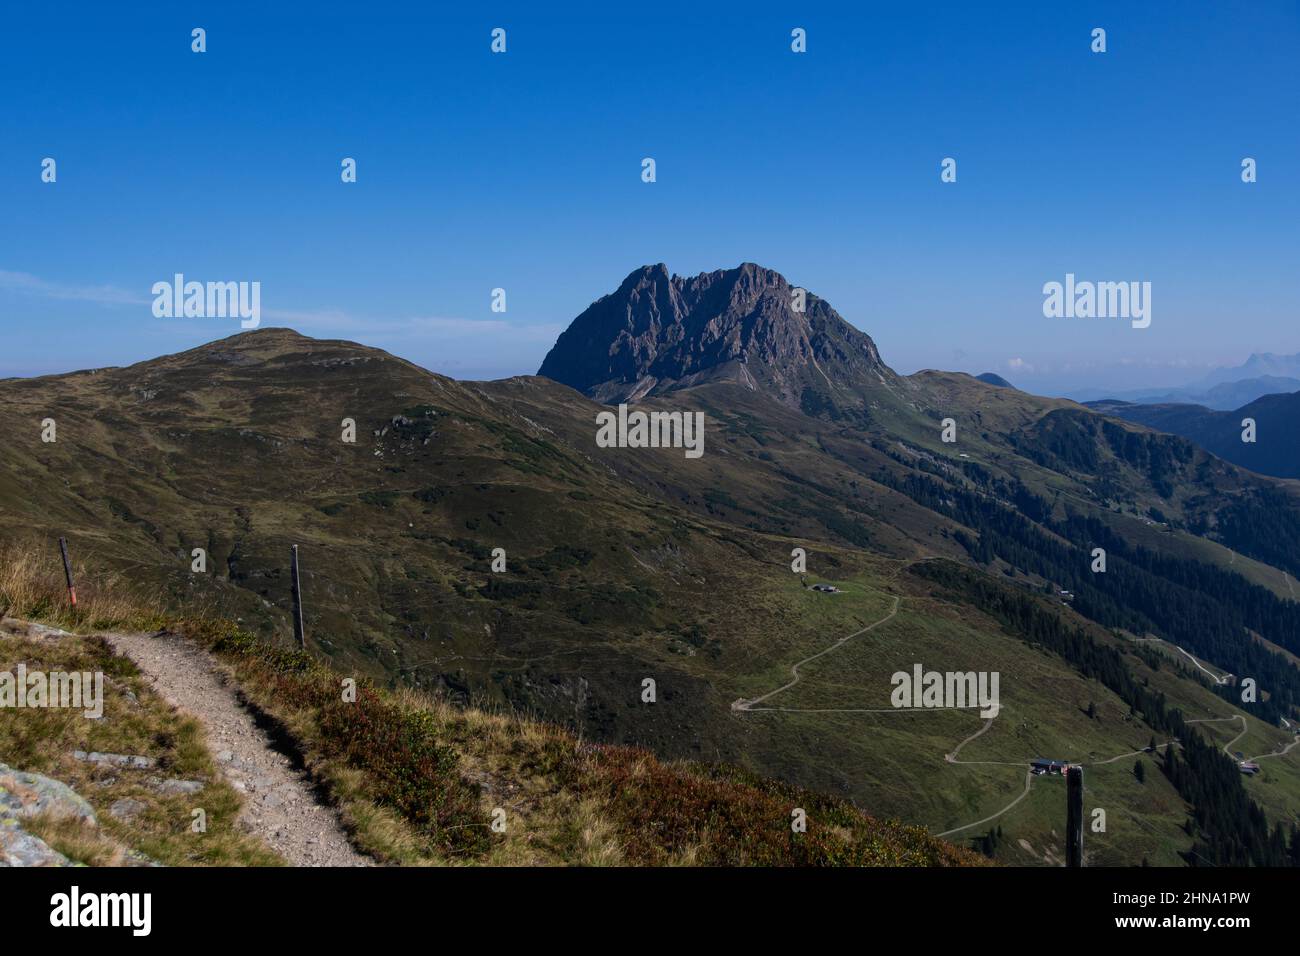 View of the mountain 'Großer Rettenstein' when the weather is nice Stock Photo